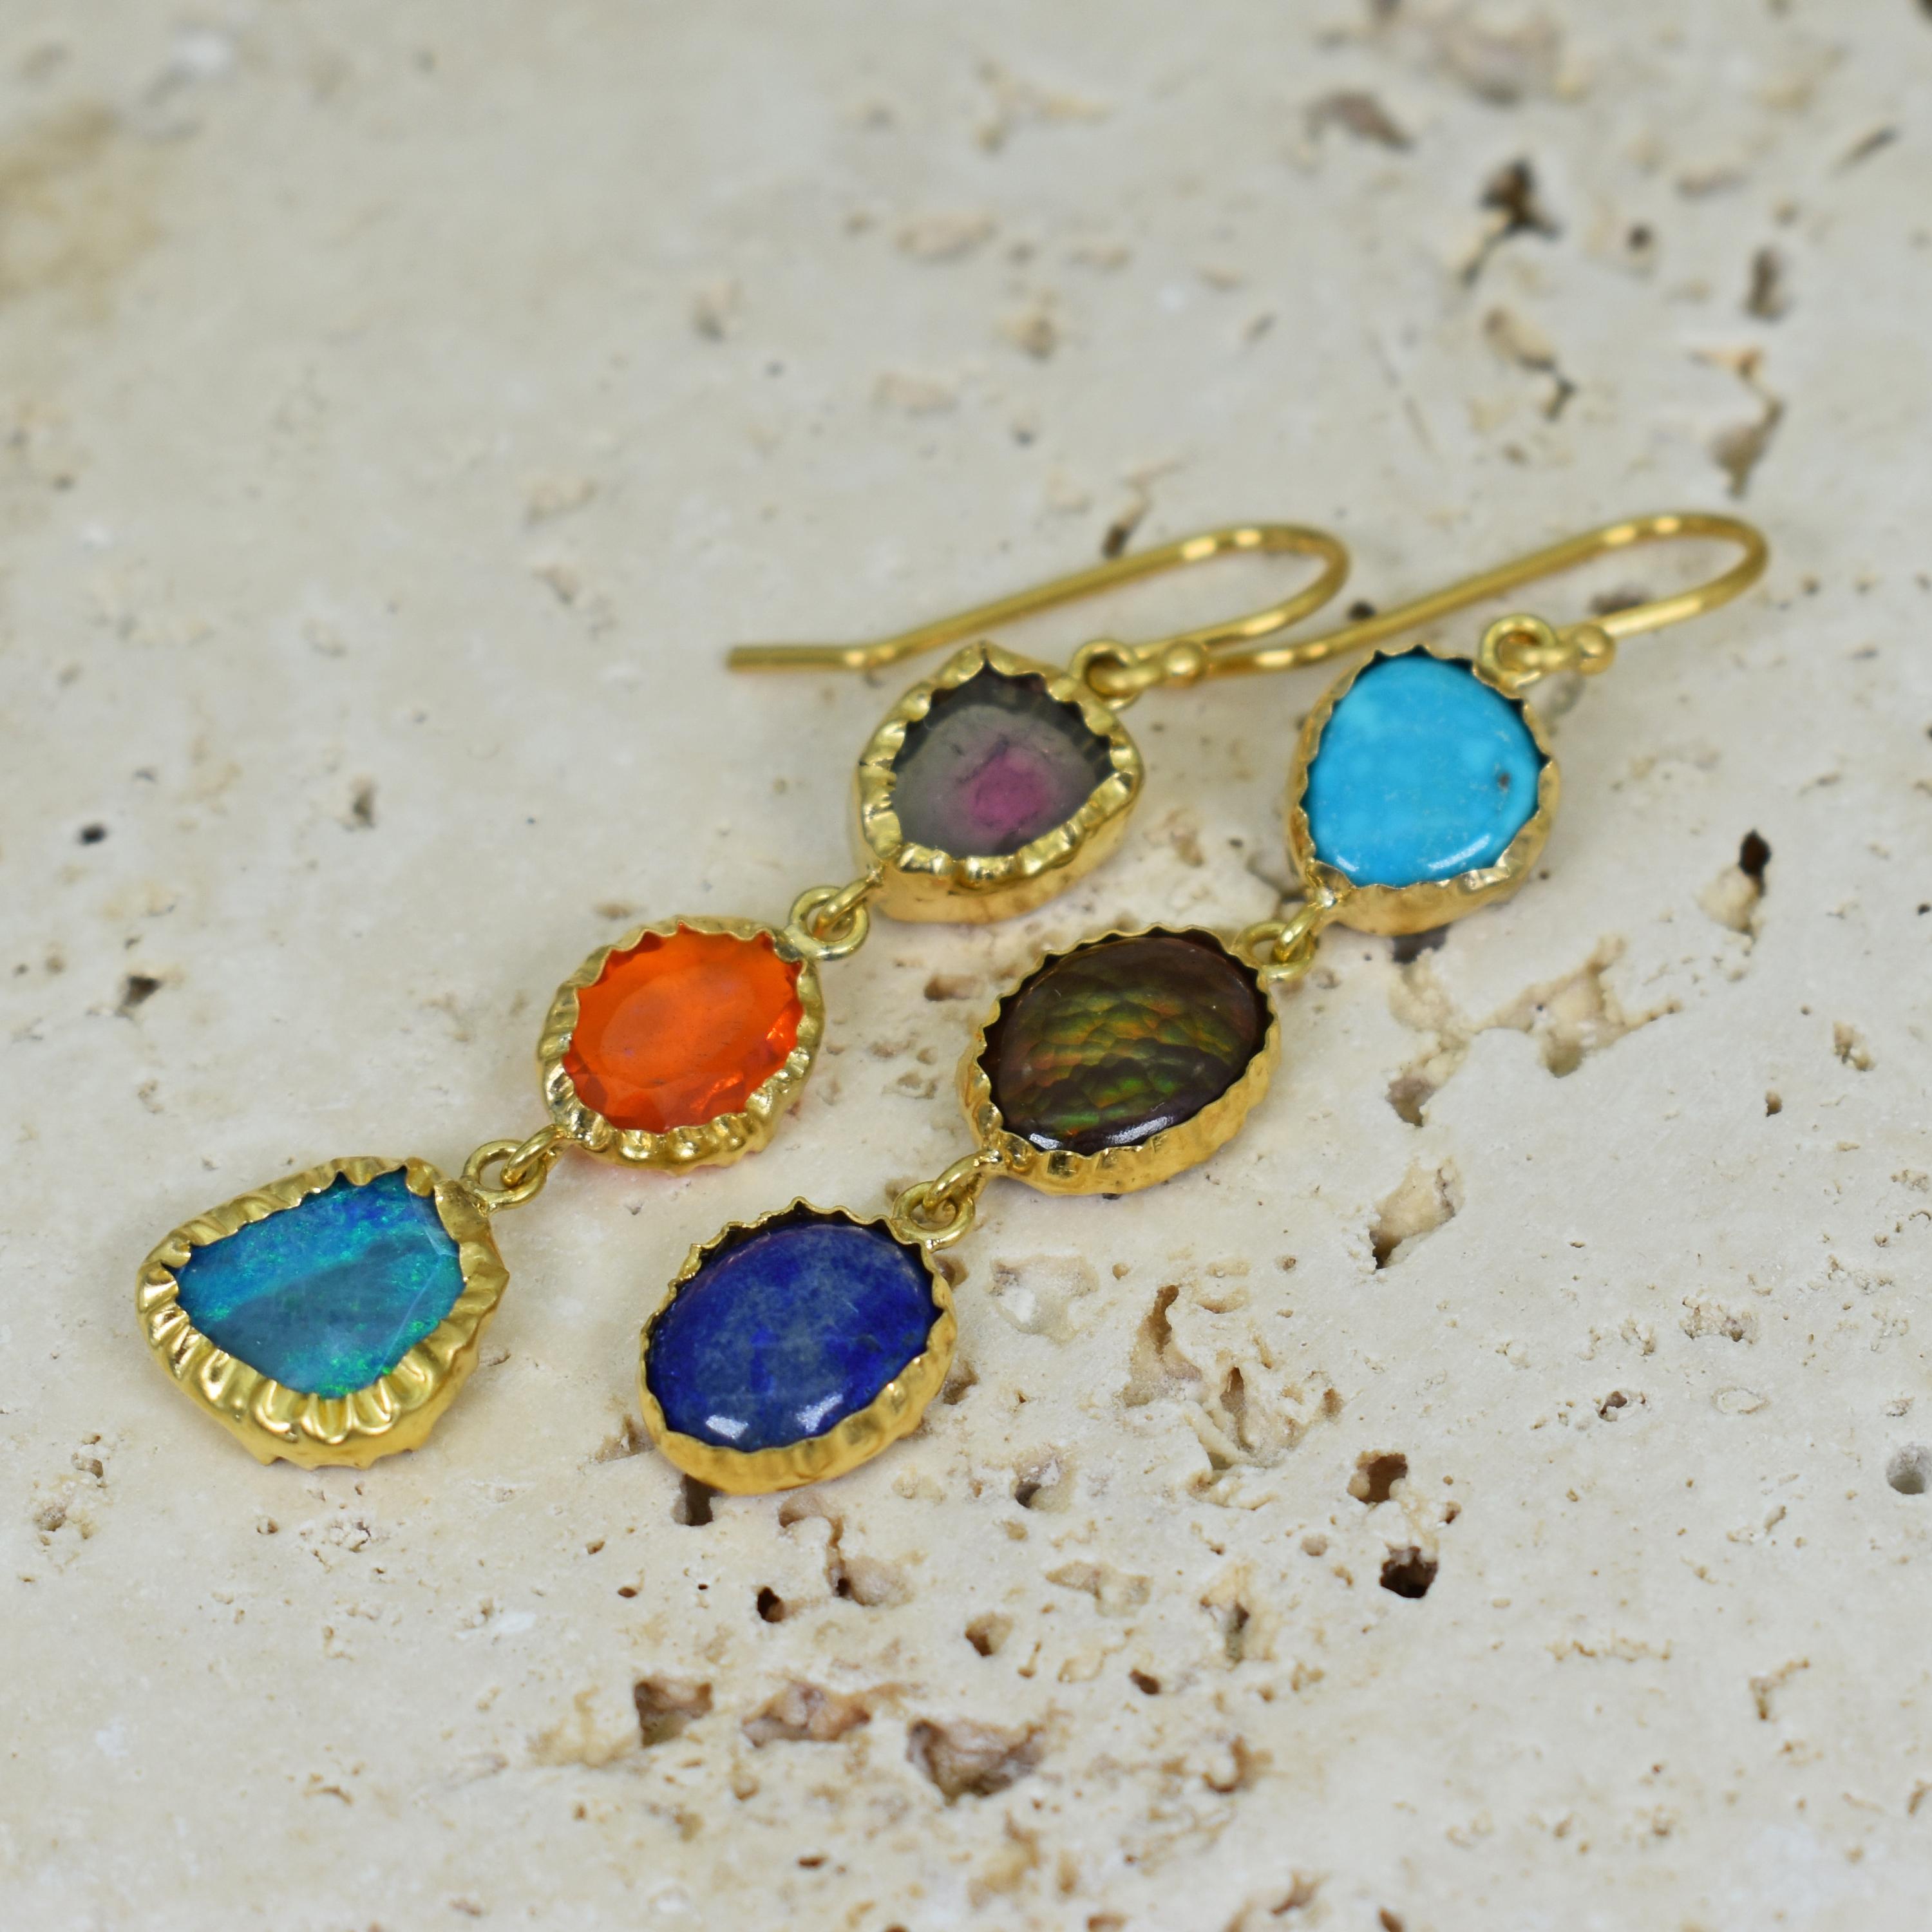 Multi-gemstone, 3-tier 22k yellow gold dangle earrings featuring a colorful variety of Watermelon Tourmaline, Fire Opal, Australian Opal, Turquoise, Fire Agate and Lapis Lazuli gemstones. Earrings, including ear wires, are 2.19 inches in length.